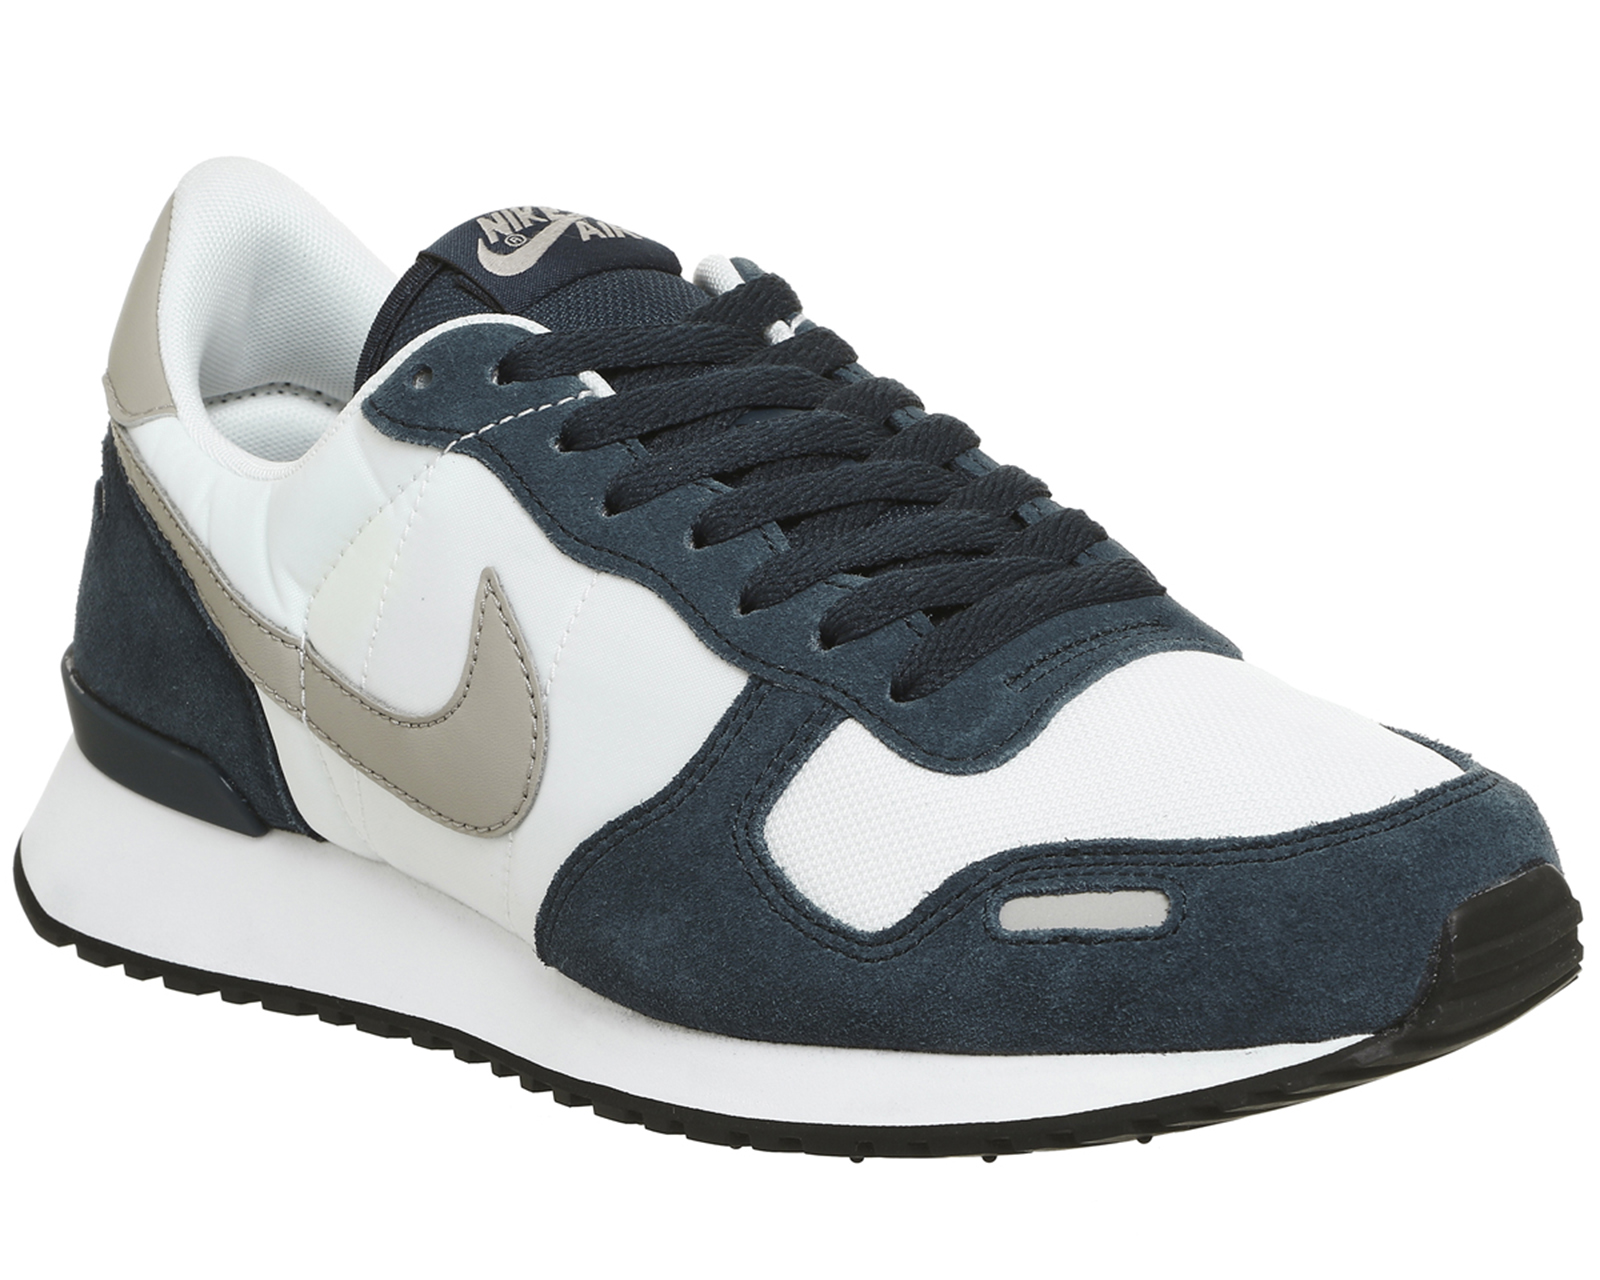 Nike Air Vortex Trainers Armory Navy Cobblestone - His trainers